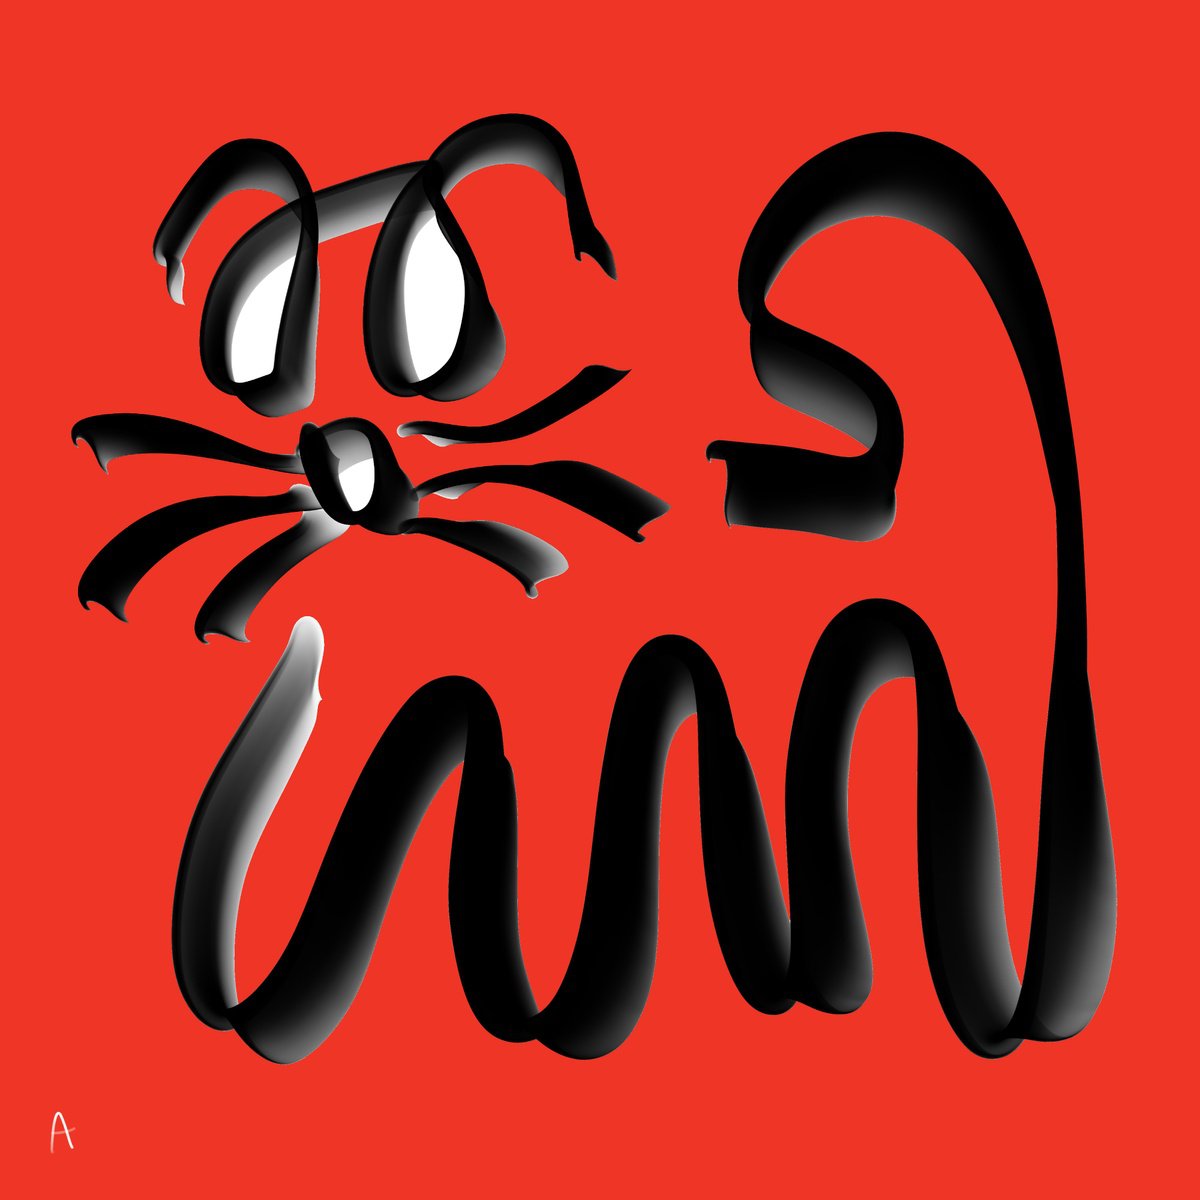 CAT (red heart collection) by ngel Rivas